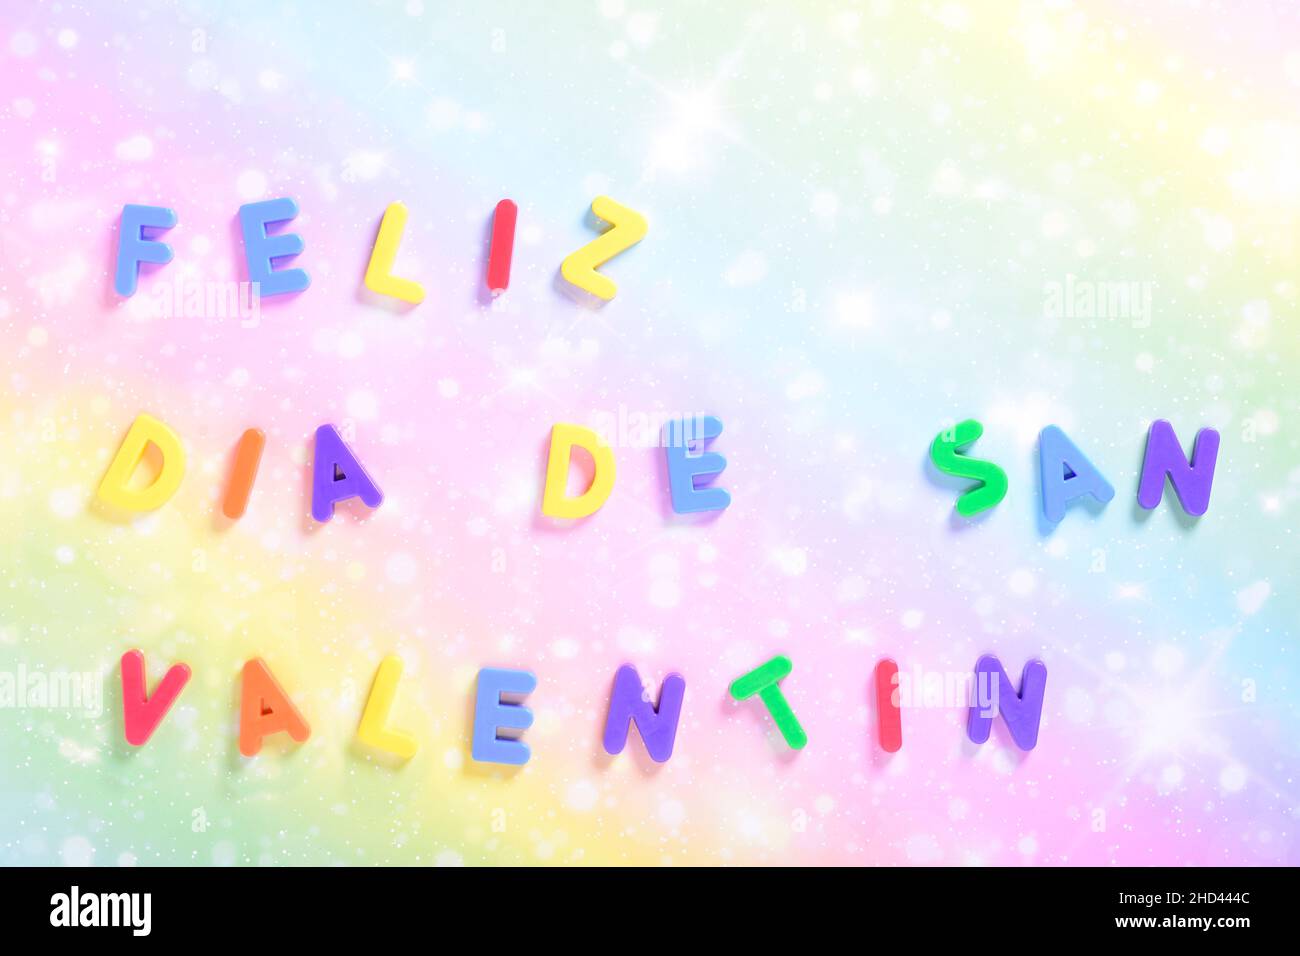 Photograph of some magnet letters with the text in Spanish of Happy Valentine's Day on a colored card.The photograph is shot in horizontal format and Stock Photo